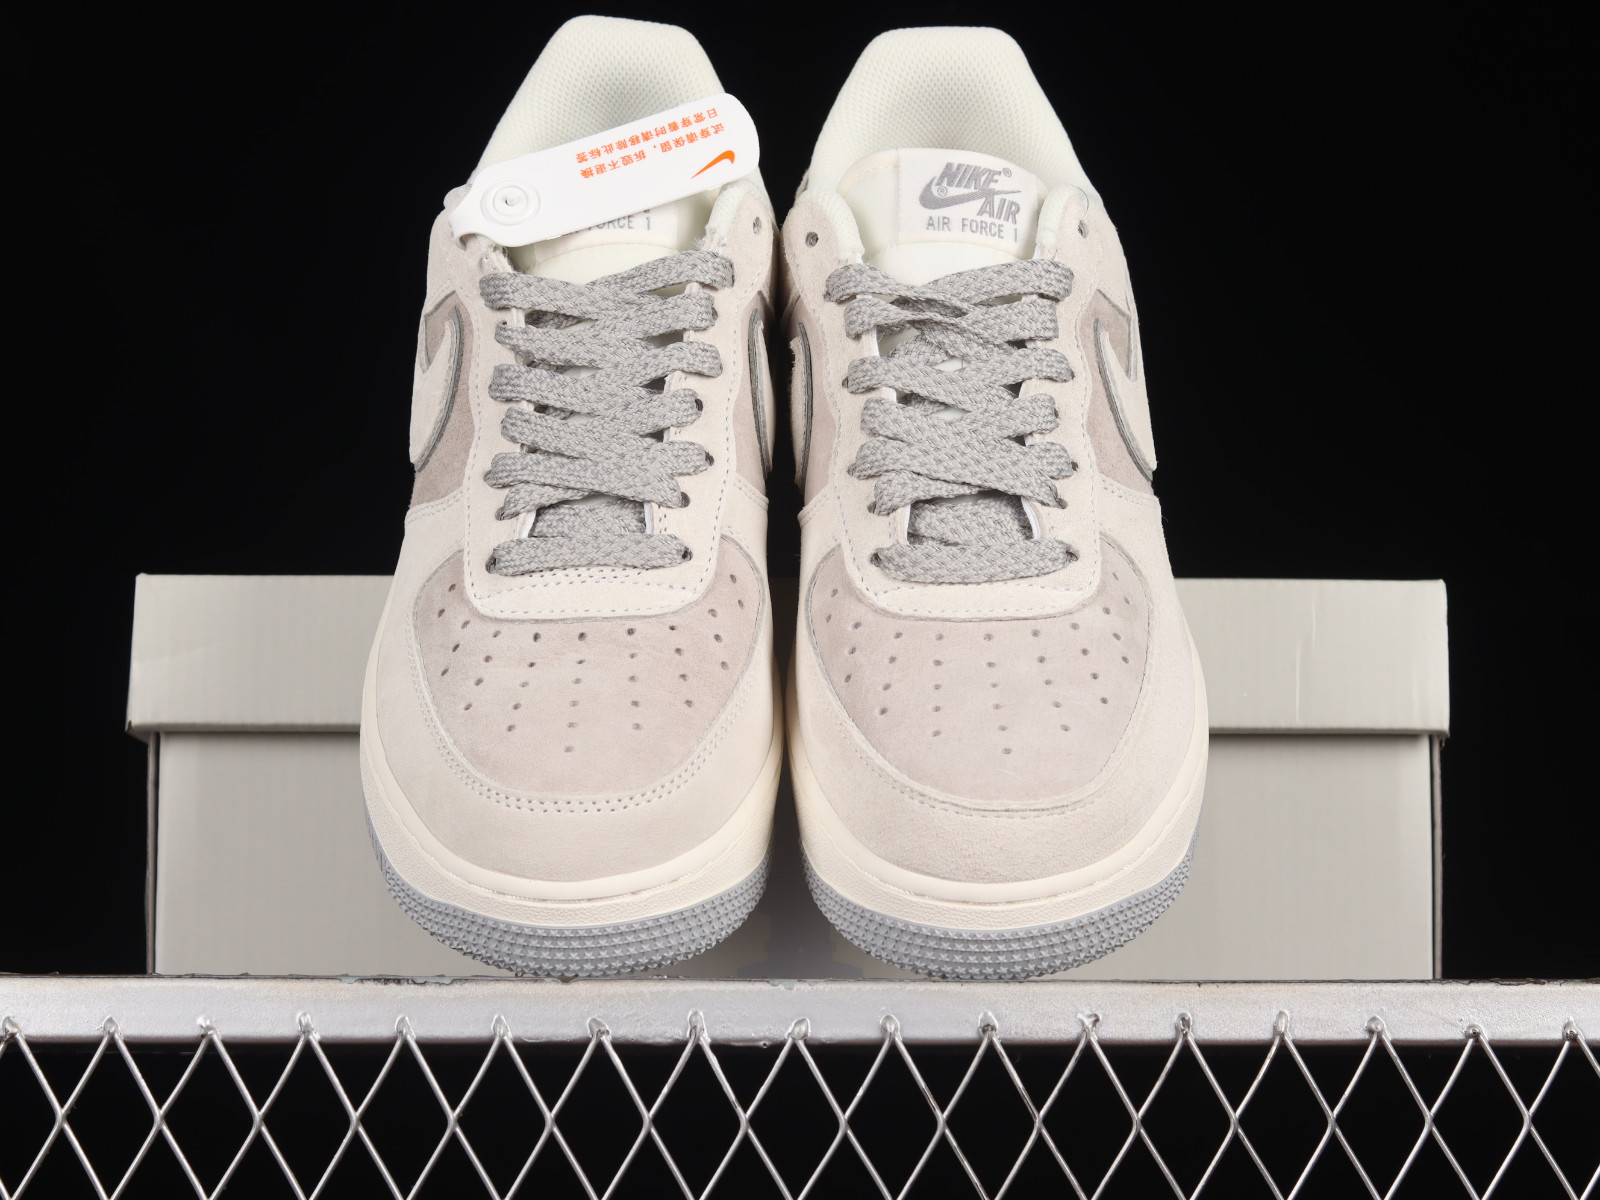 nike air tech challenge 2 french open - MultiscaleconsultingShops - 005 Nike Air Force 1 07 Low Four Horsemen PE Suede Dark Grey White DZ3696